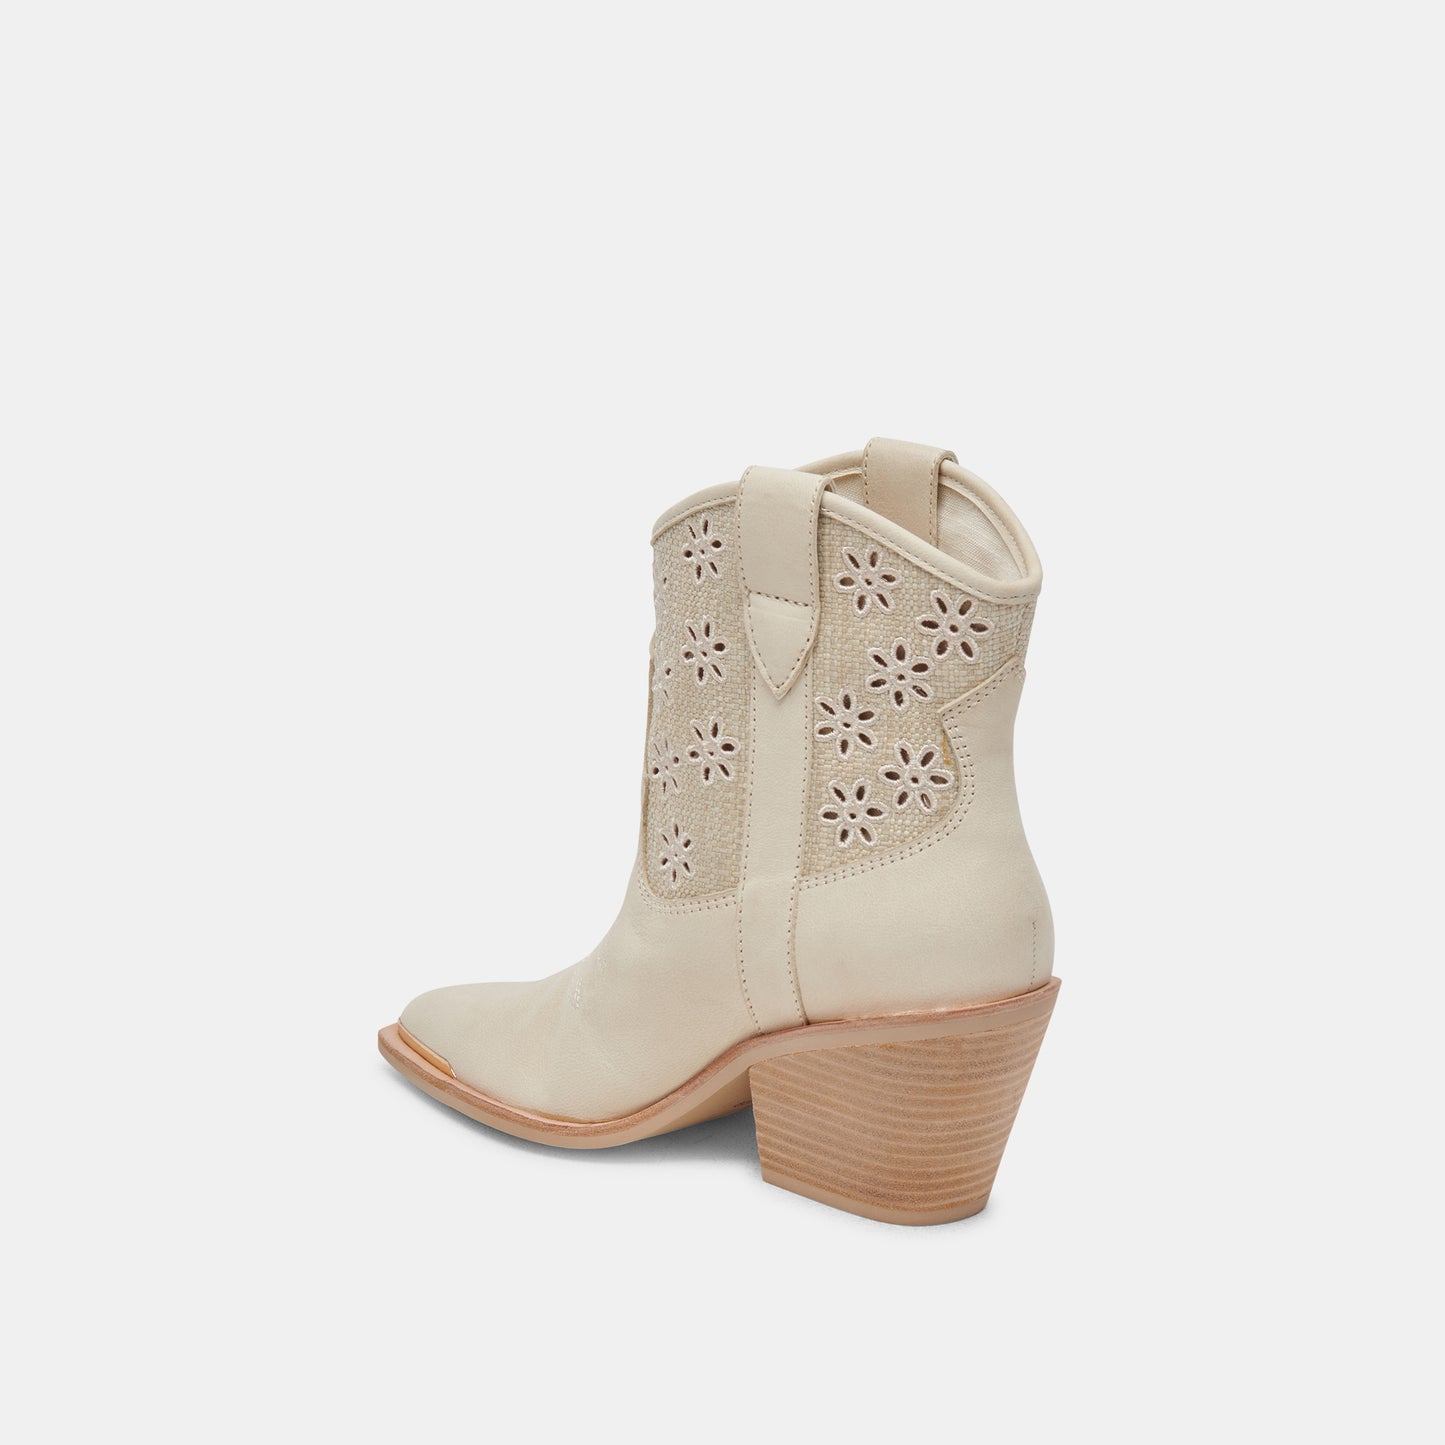 NASHE BOOTIES OATMEAL FLORAL EYELET